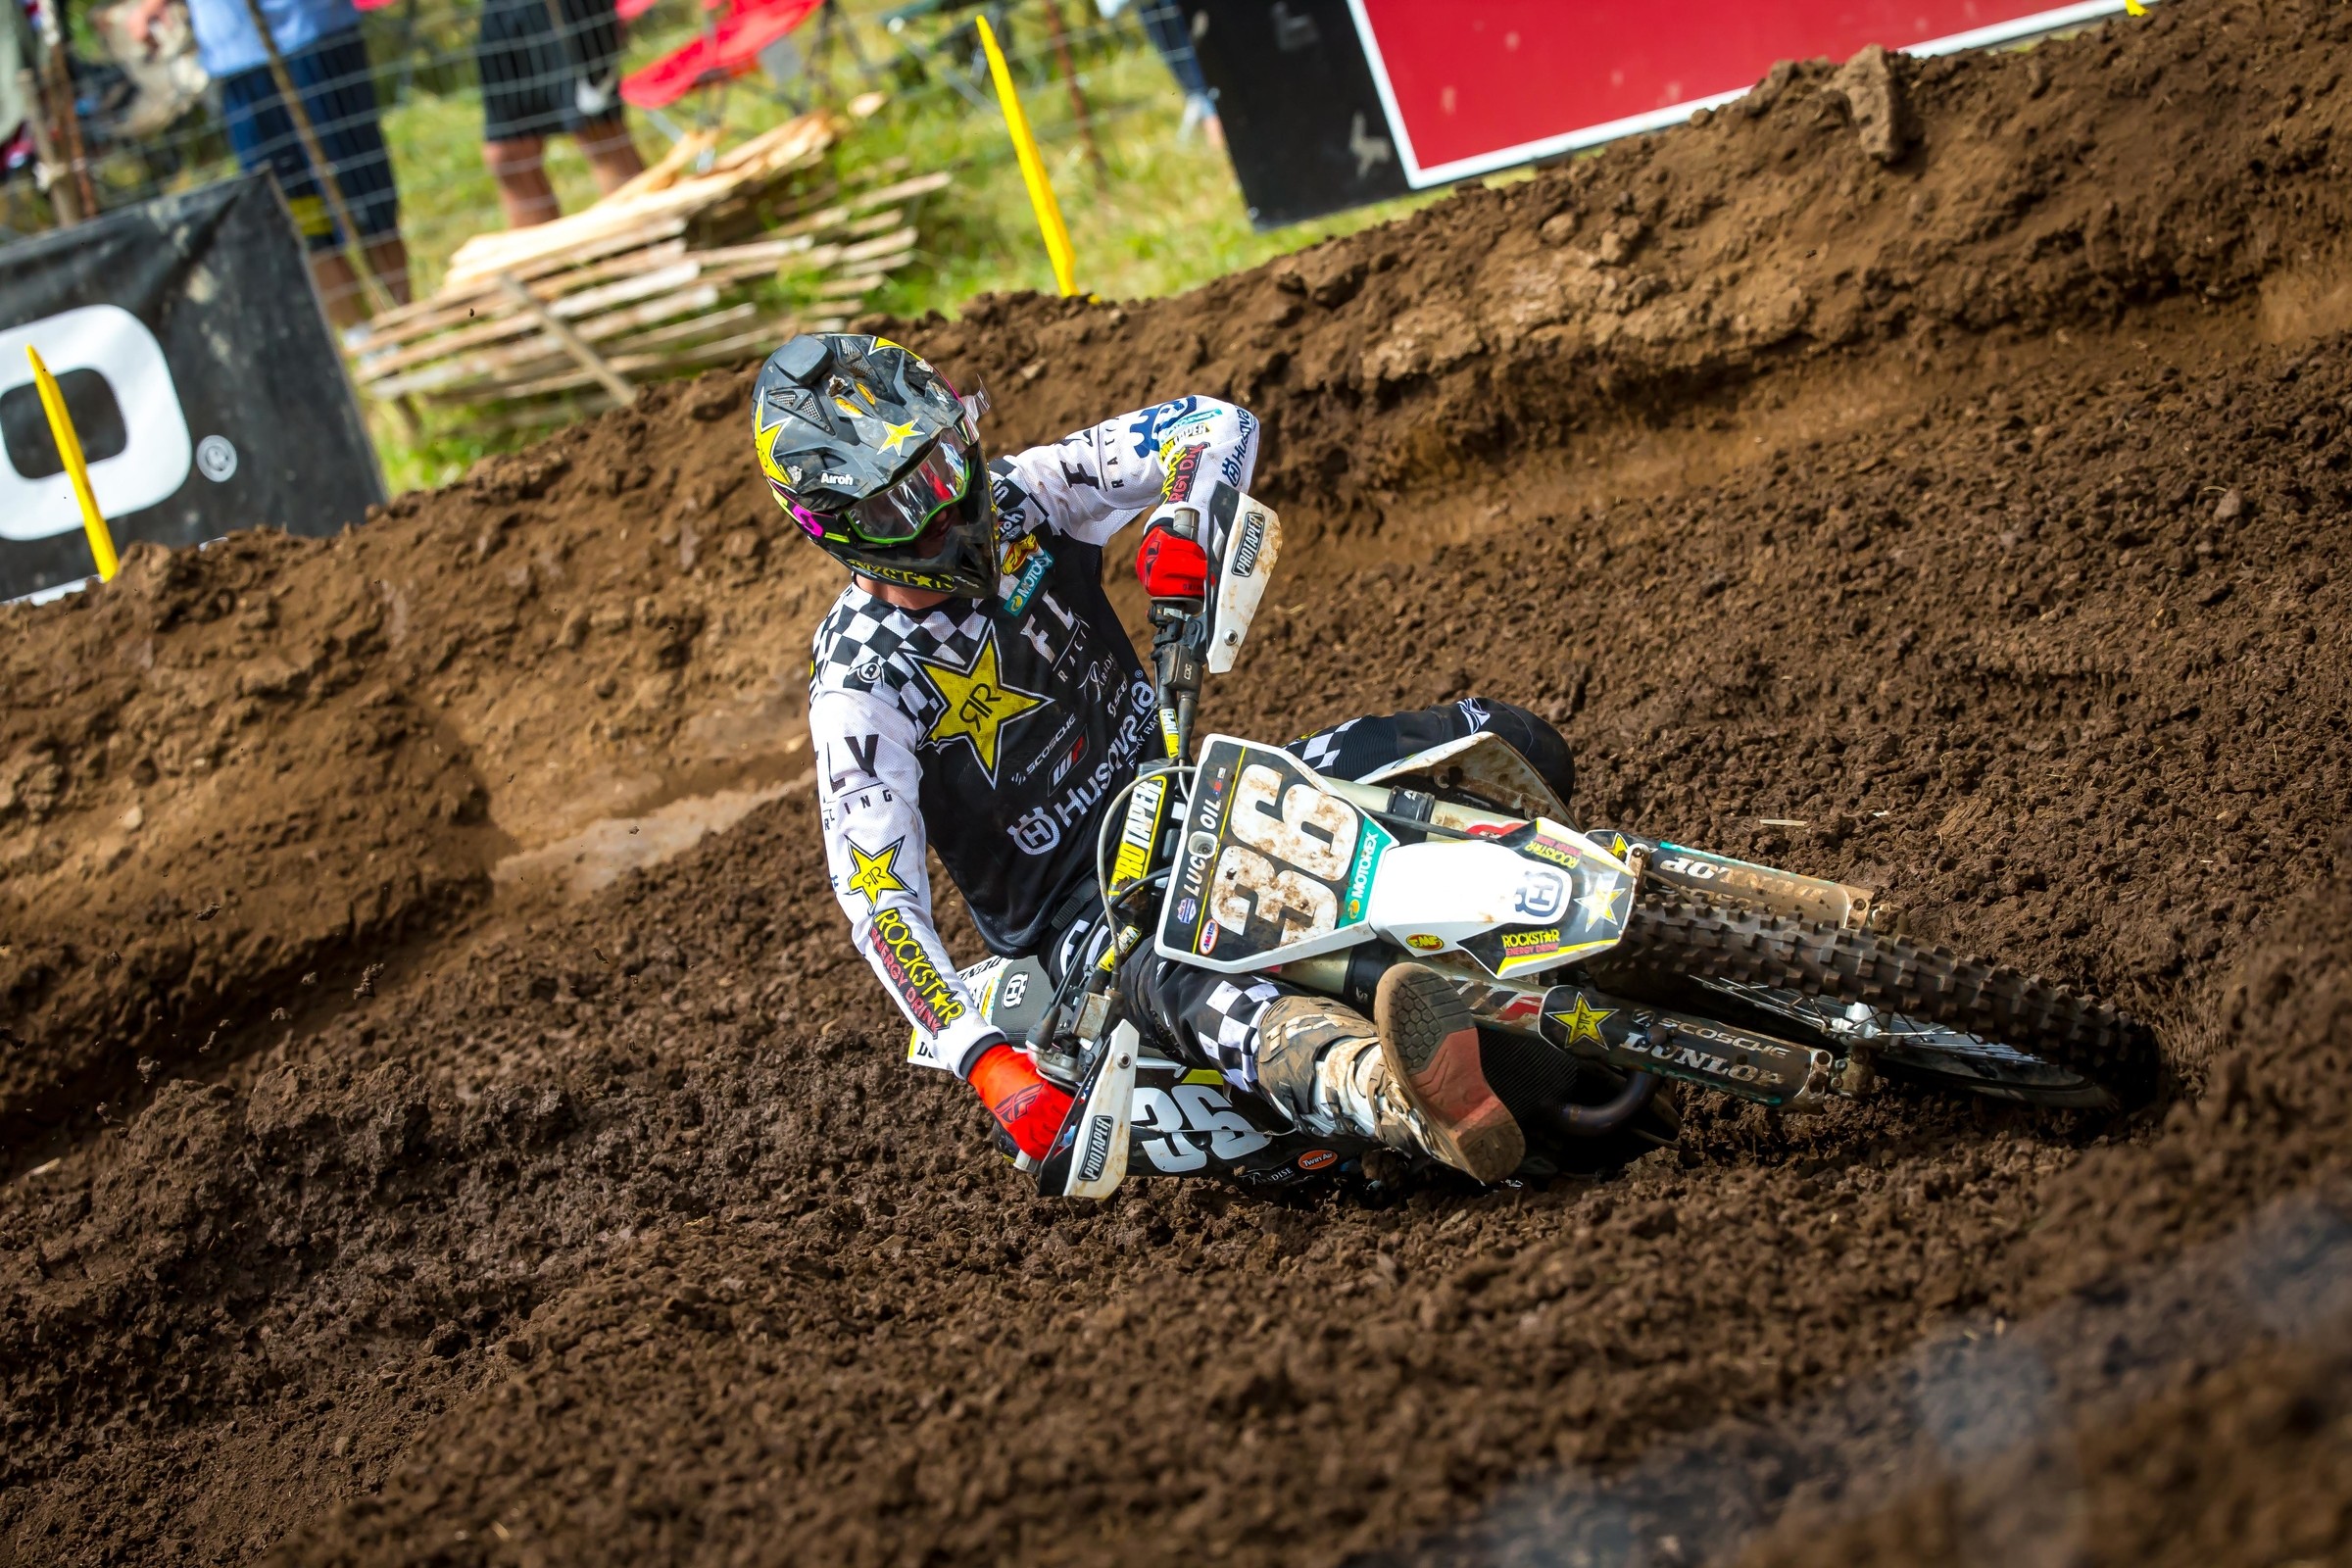 How to Watch 2019 Unadilla National - Motocross